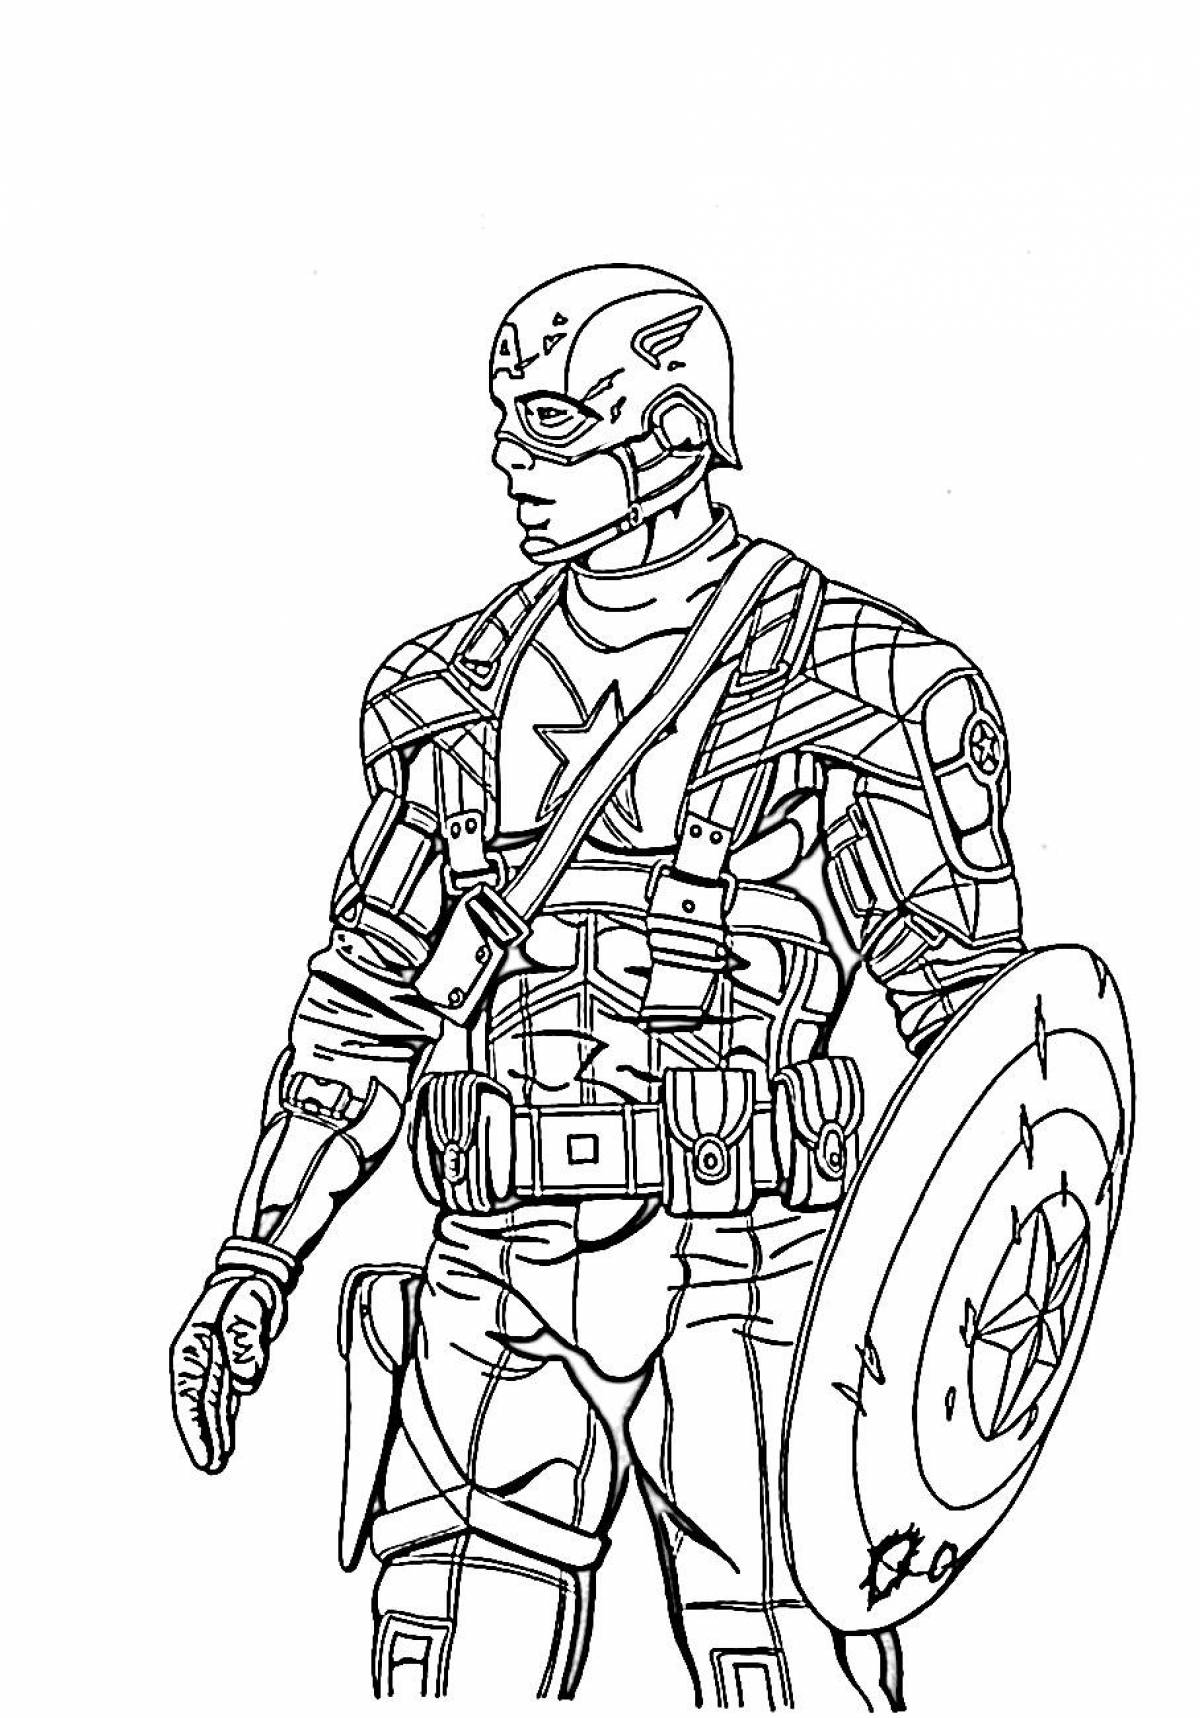 Captain america's colorful coloring page